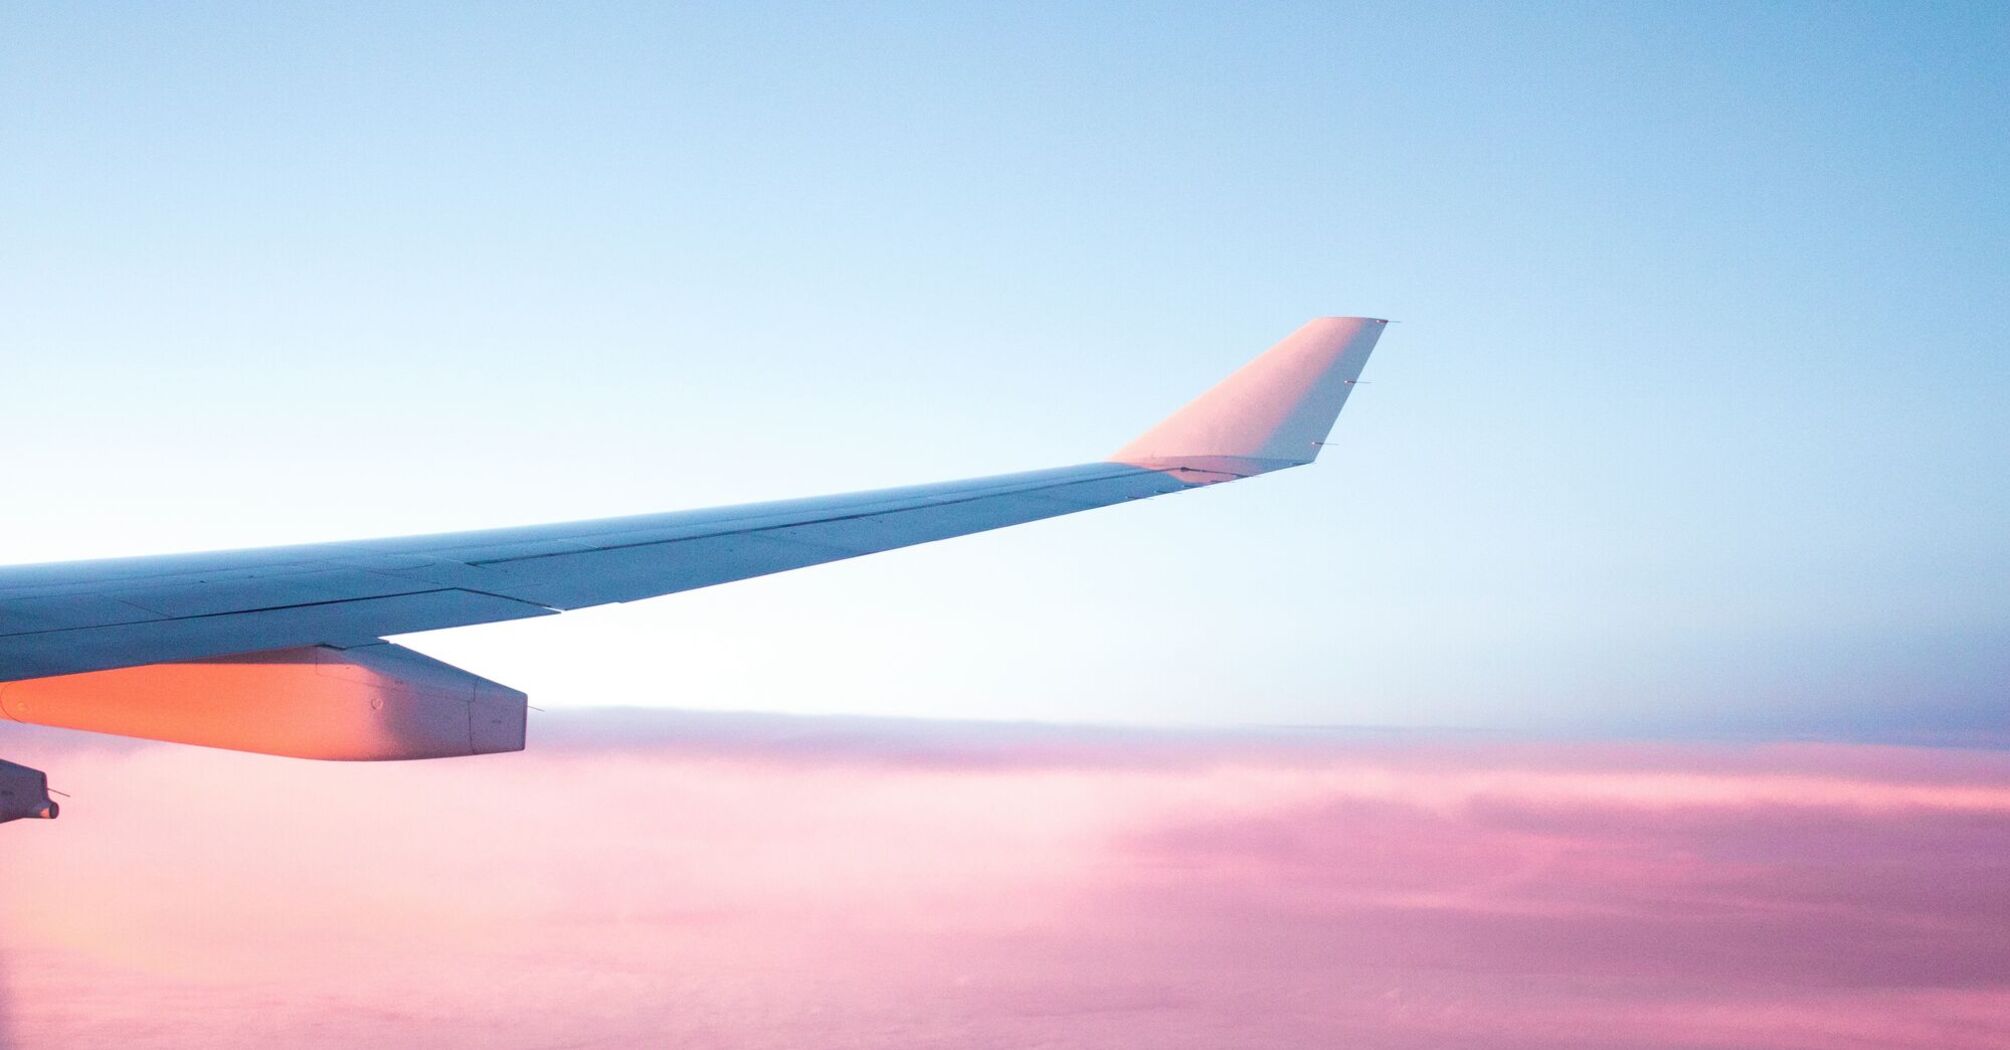 View of an airplane wing against a pastel pink sky during sunrise or sunset